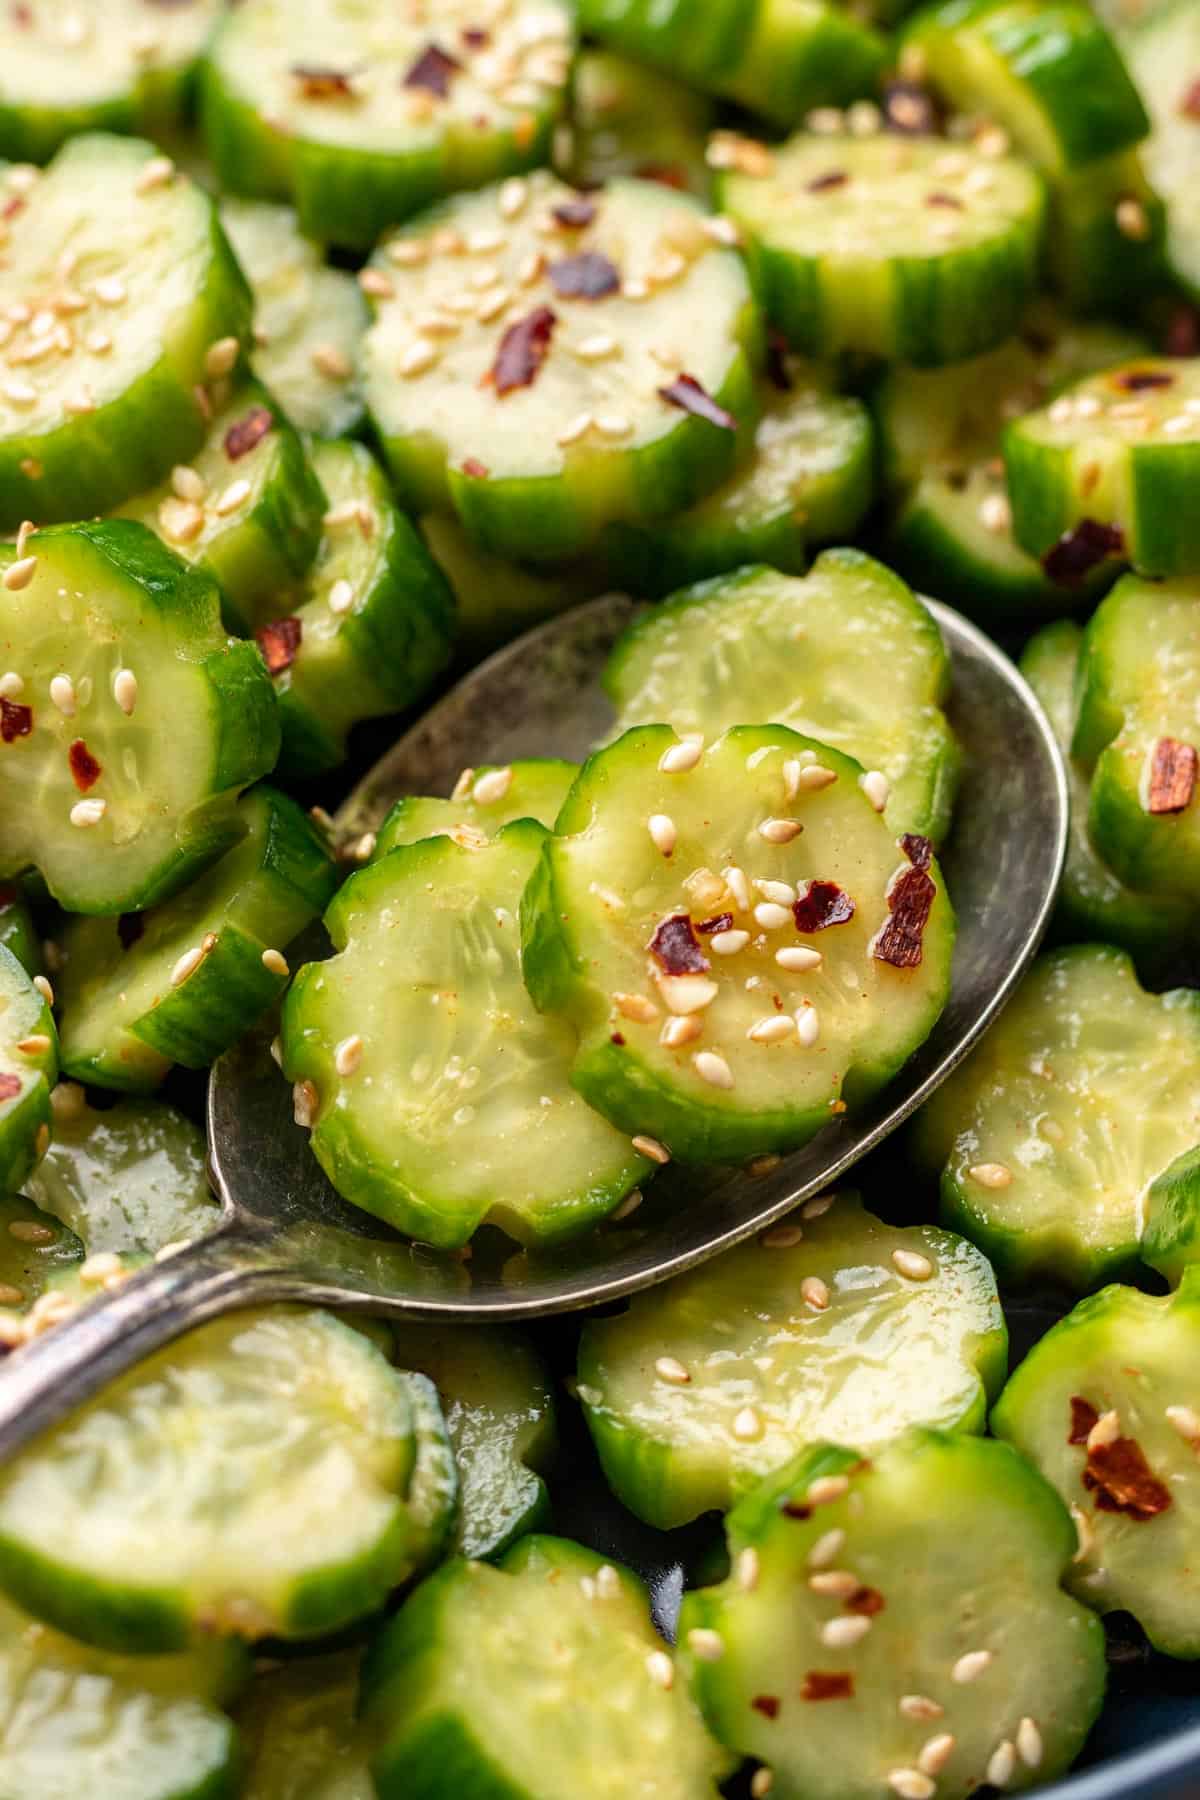 Spicy cucumber salad scooped with a serving spoon.